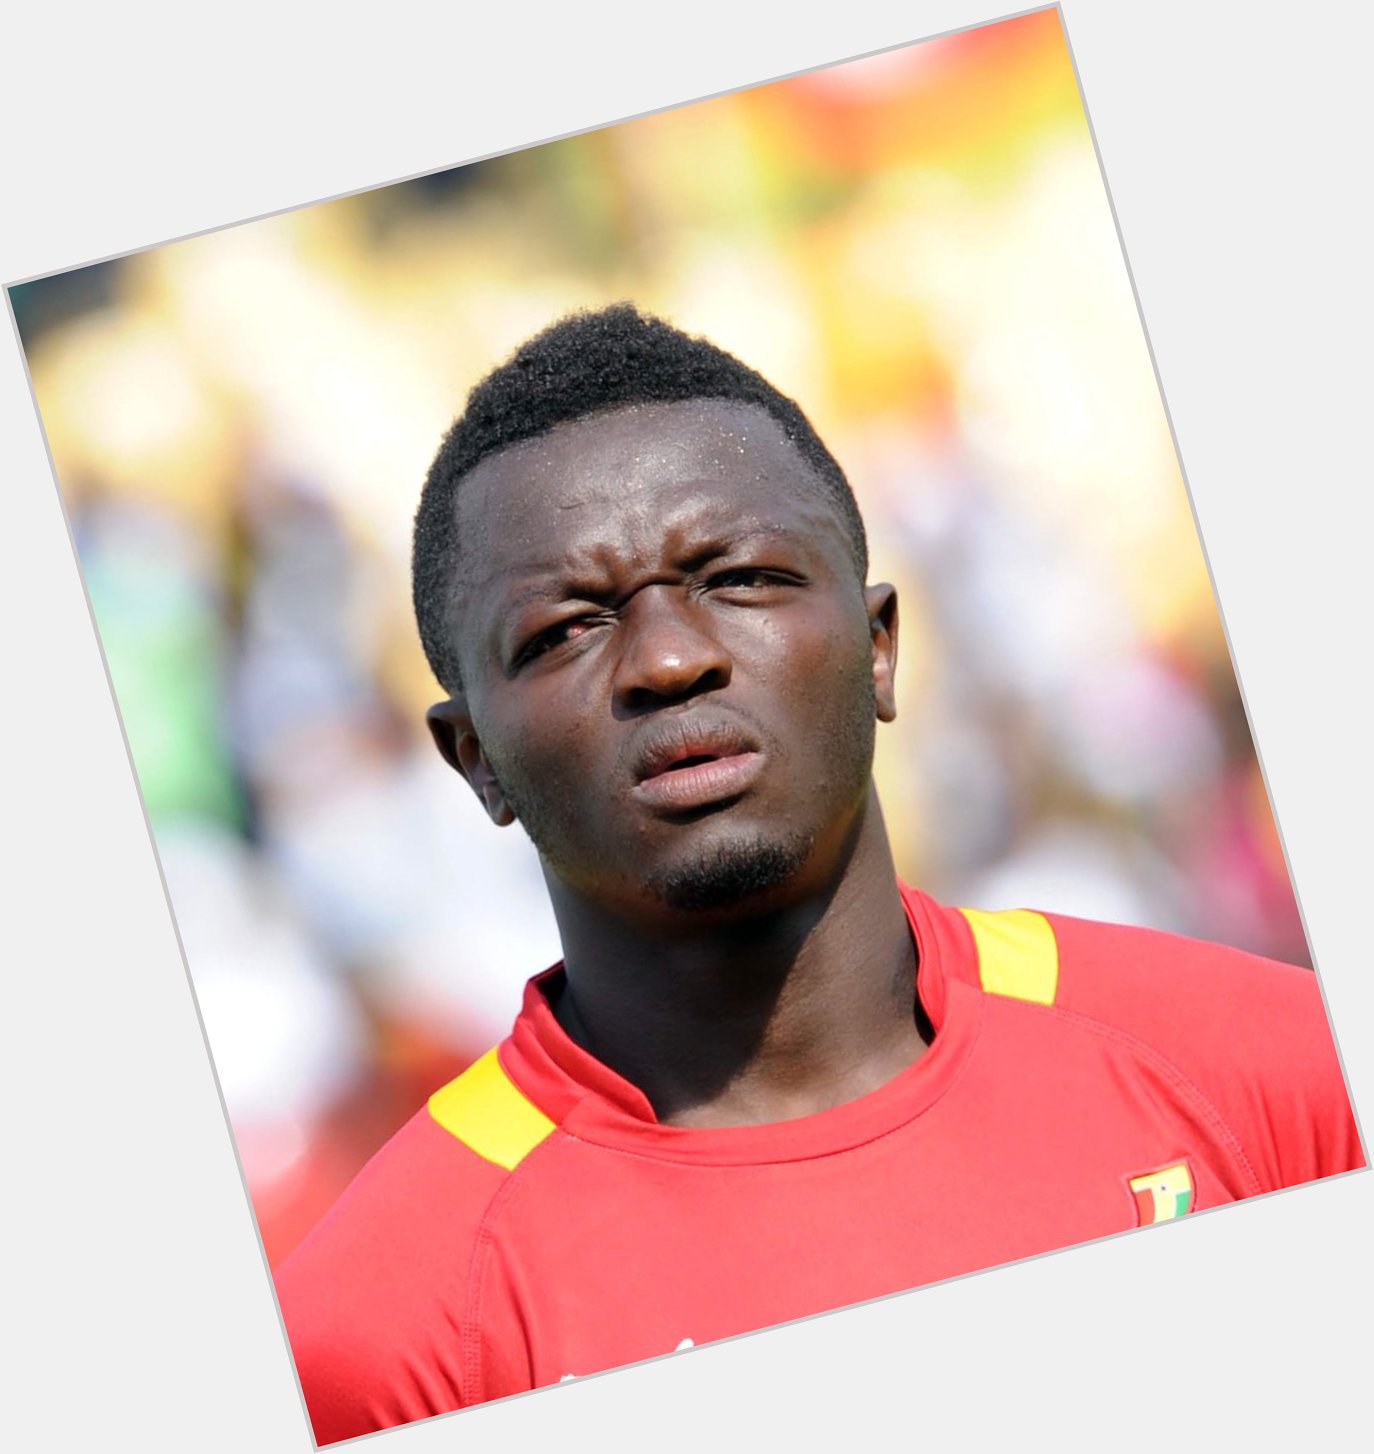 Join us in wishing Sulley Muntari a very happy birthday!    